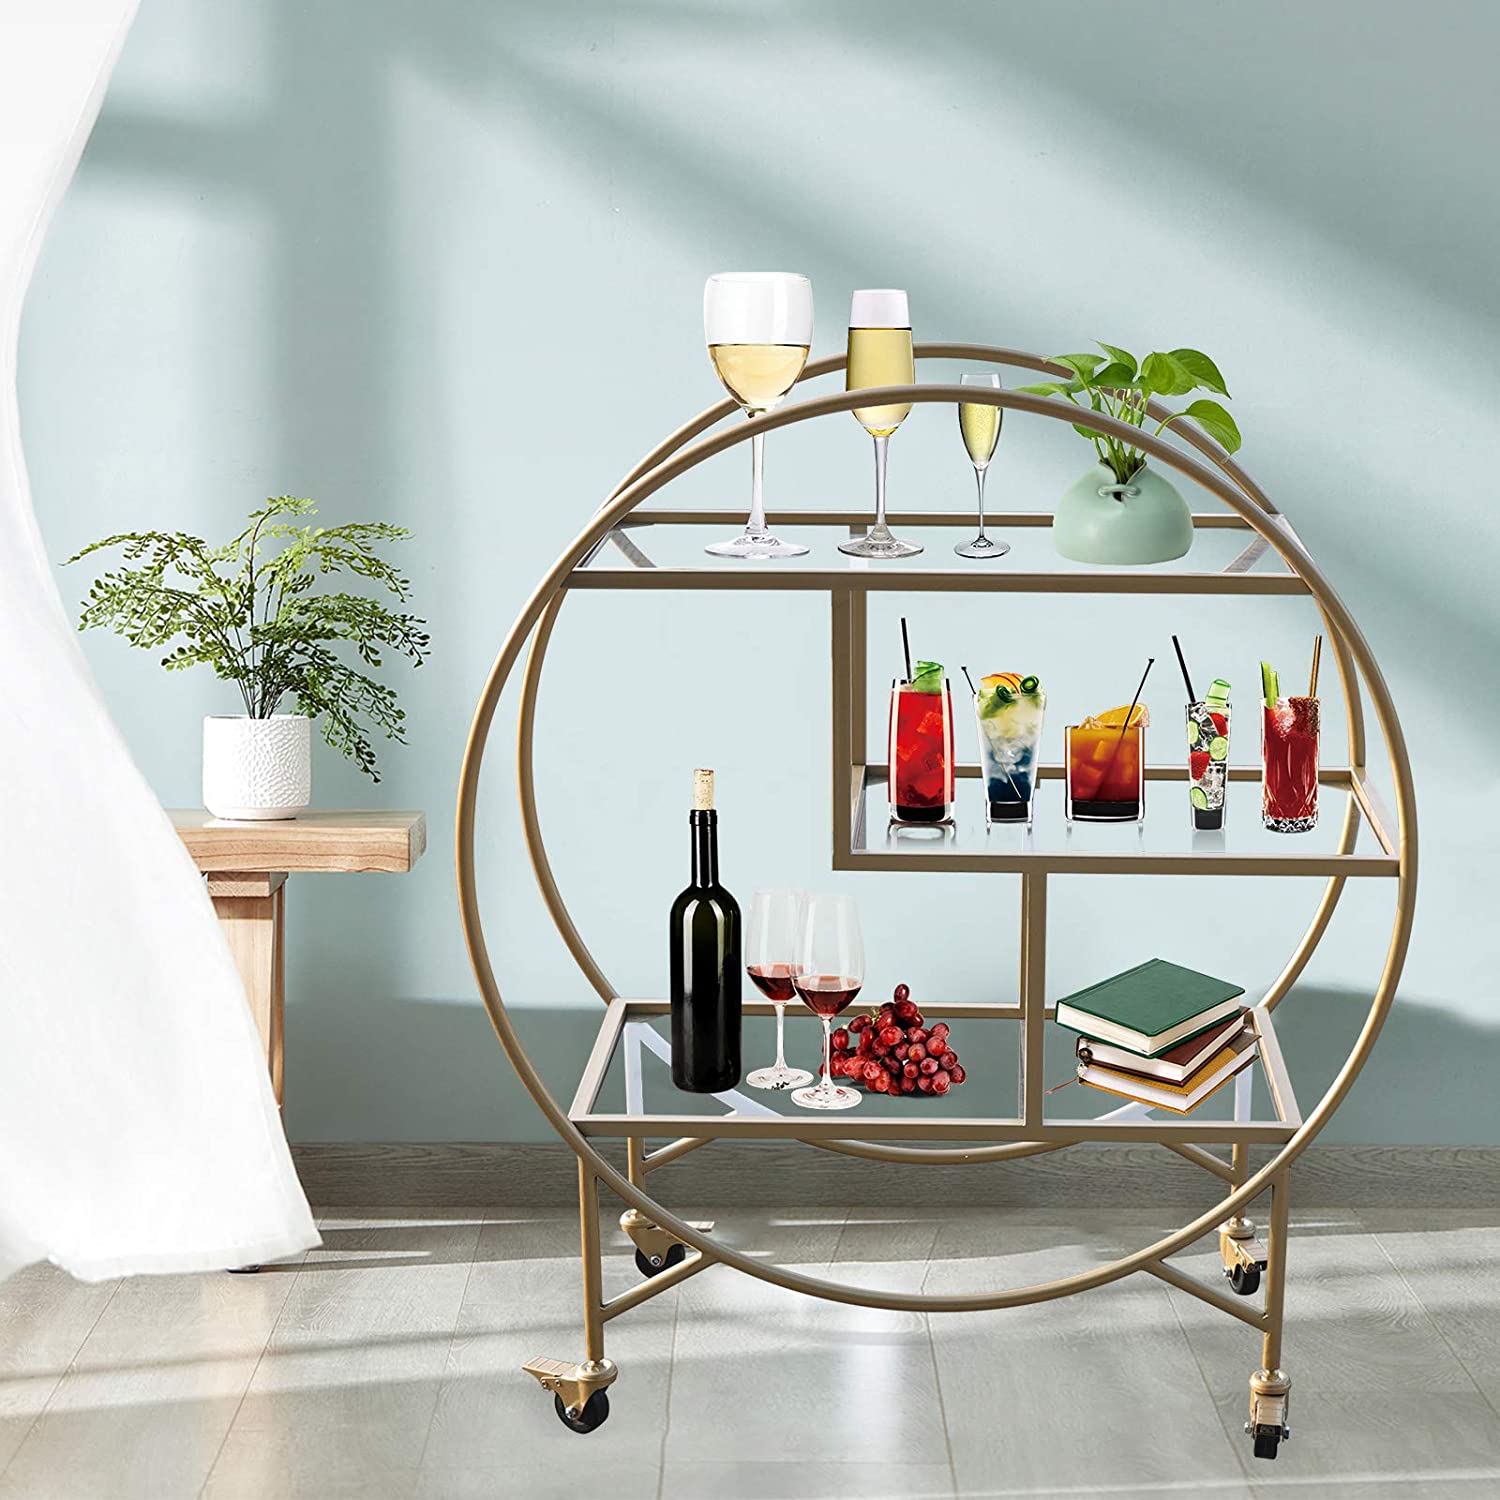 Gdrasuya10 Gold Bar Cart, 3-Tier Mobile Bar Cart, with 2 Glass Shelves and Casters, Gold, 30.31 16.54 35.4 inches, for Home Kitchen Club, Antique Gold Finish